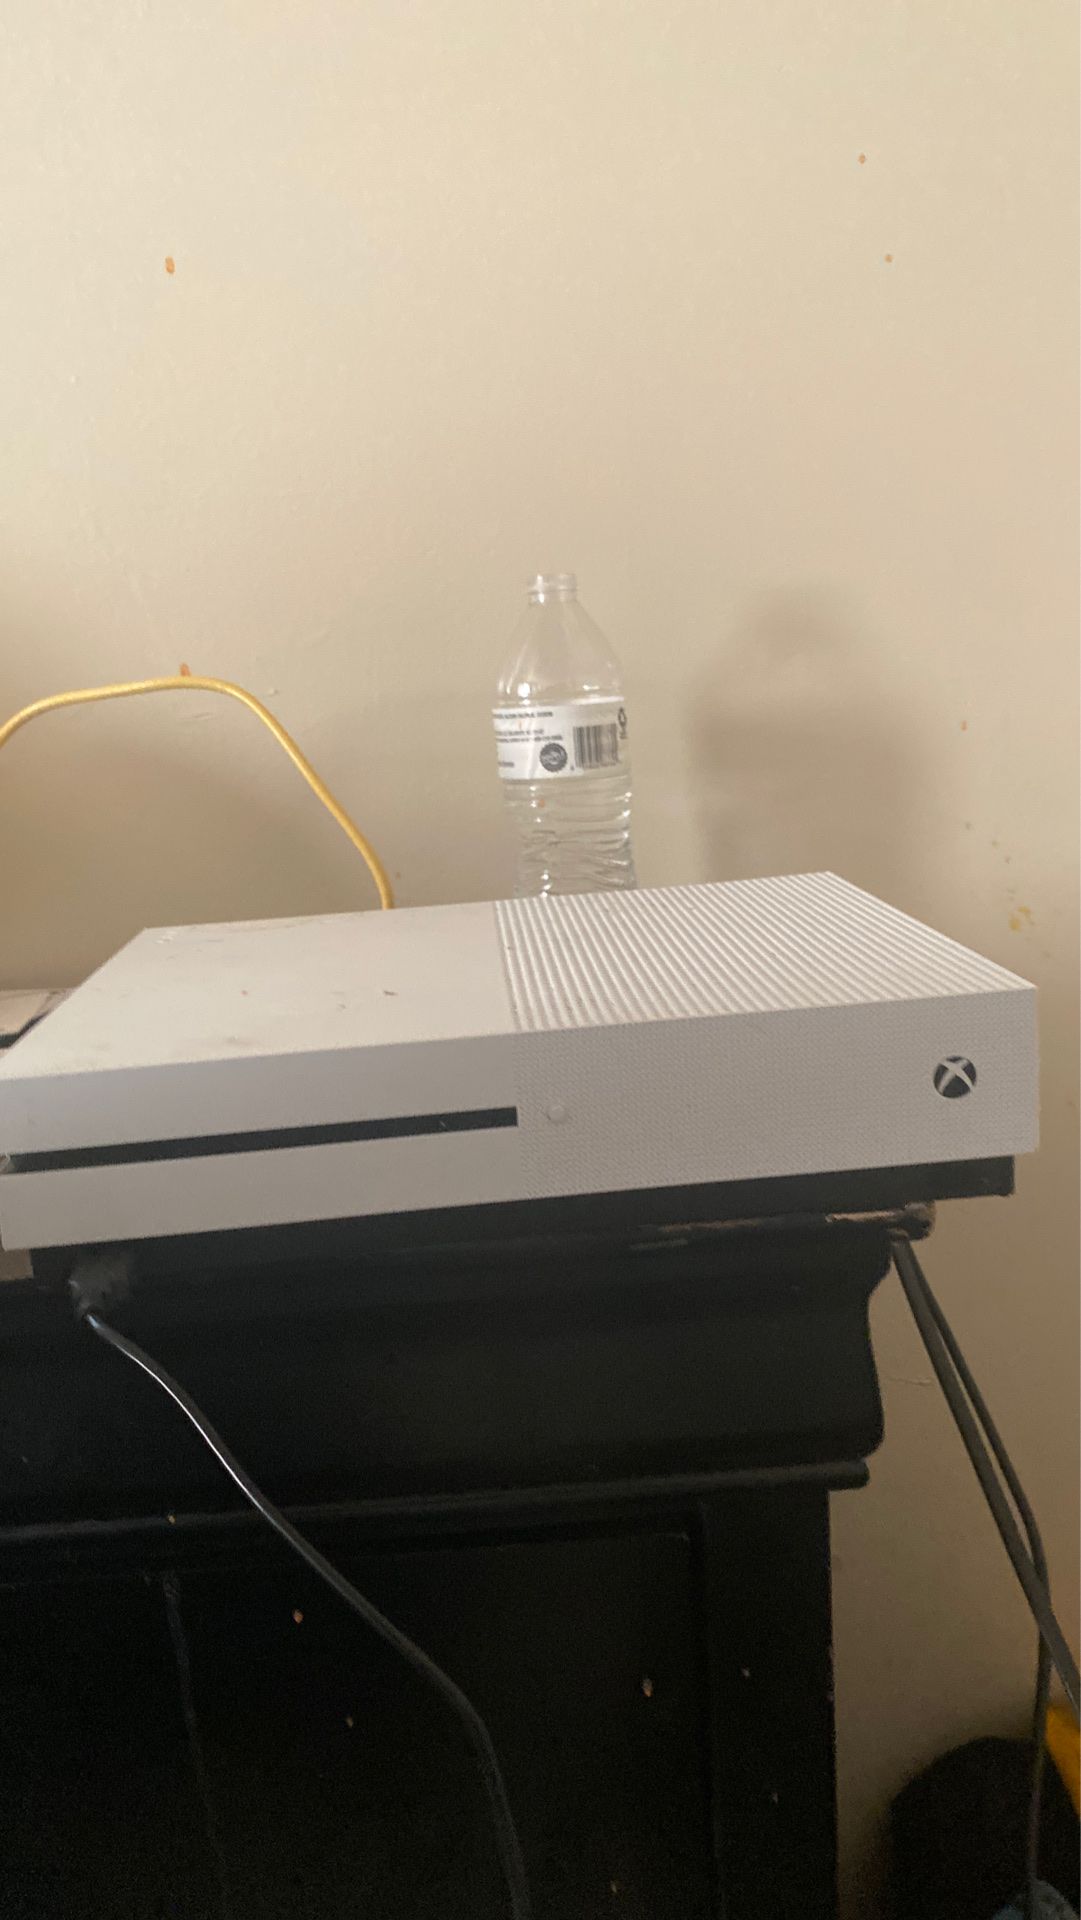 Xbox one S 1TB (cords and controller)